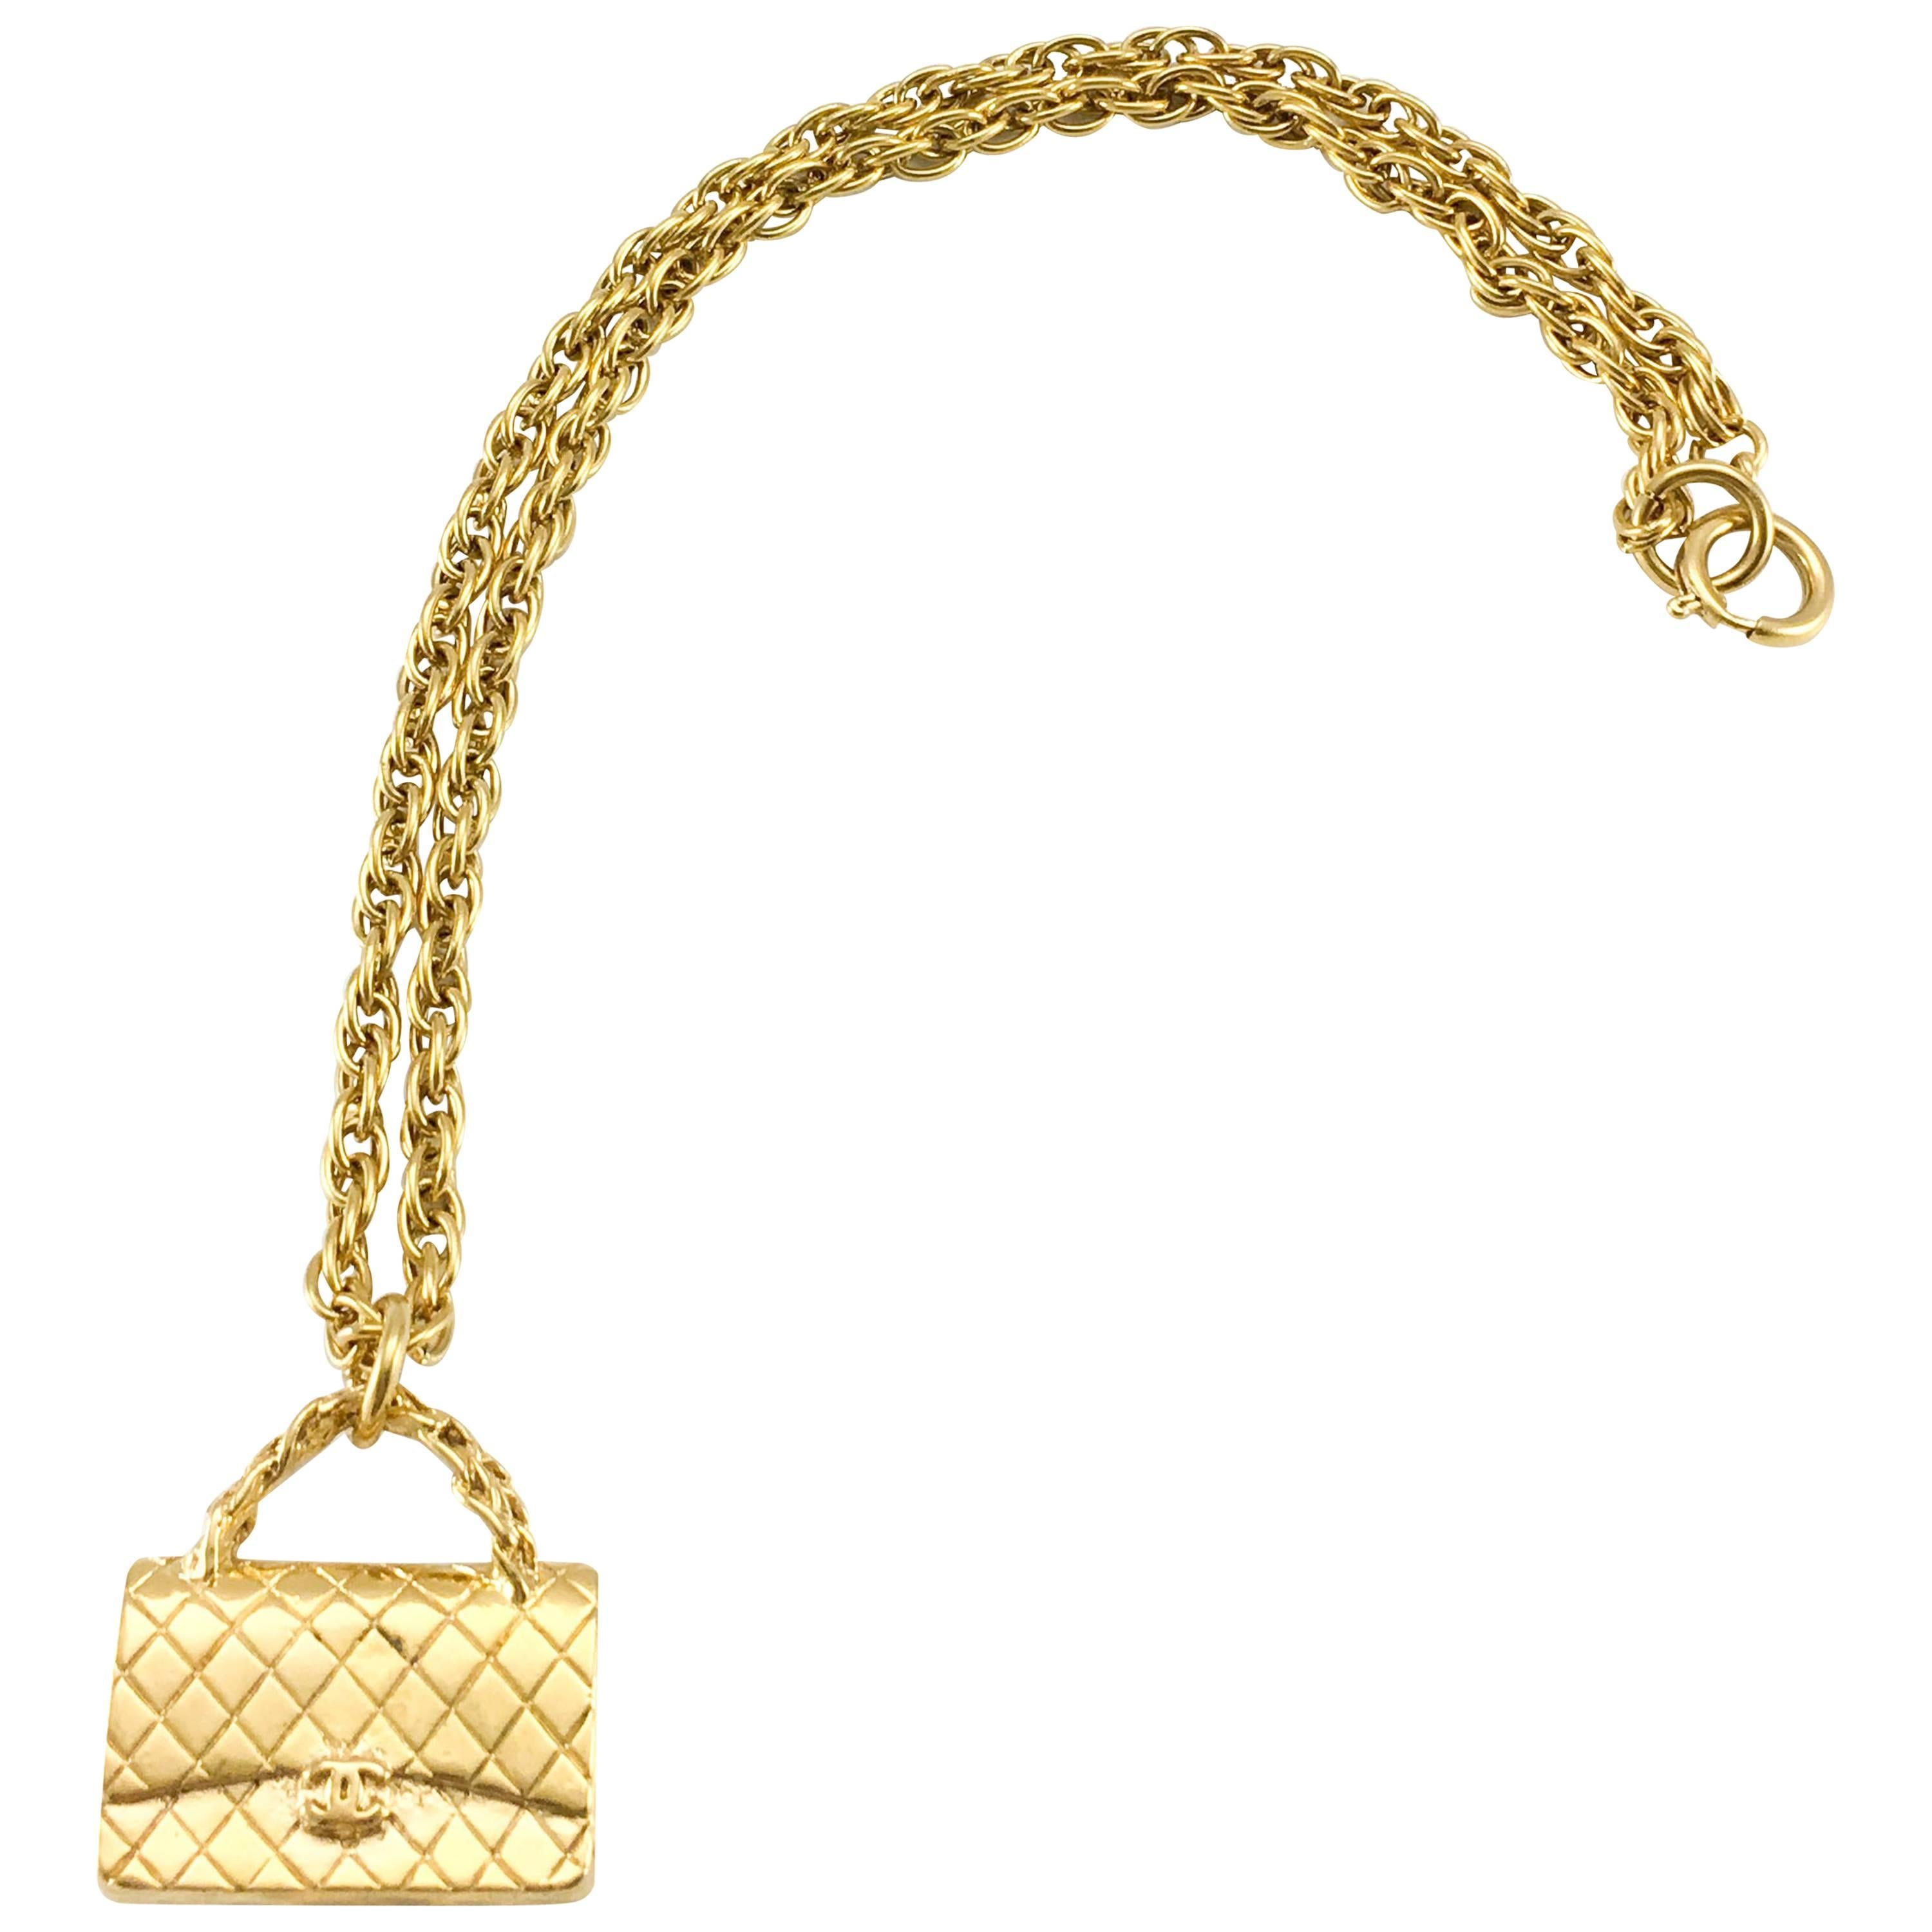 1994 Chanel Gold-Plated 2.55 Quilted Handbag Pendant Necklace For Sale